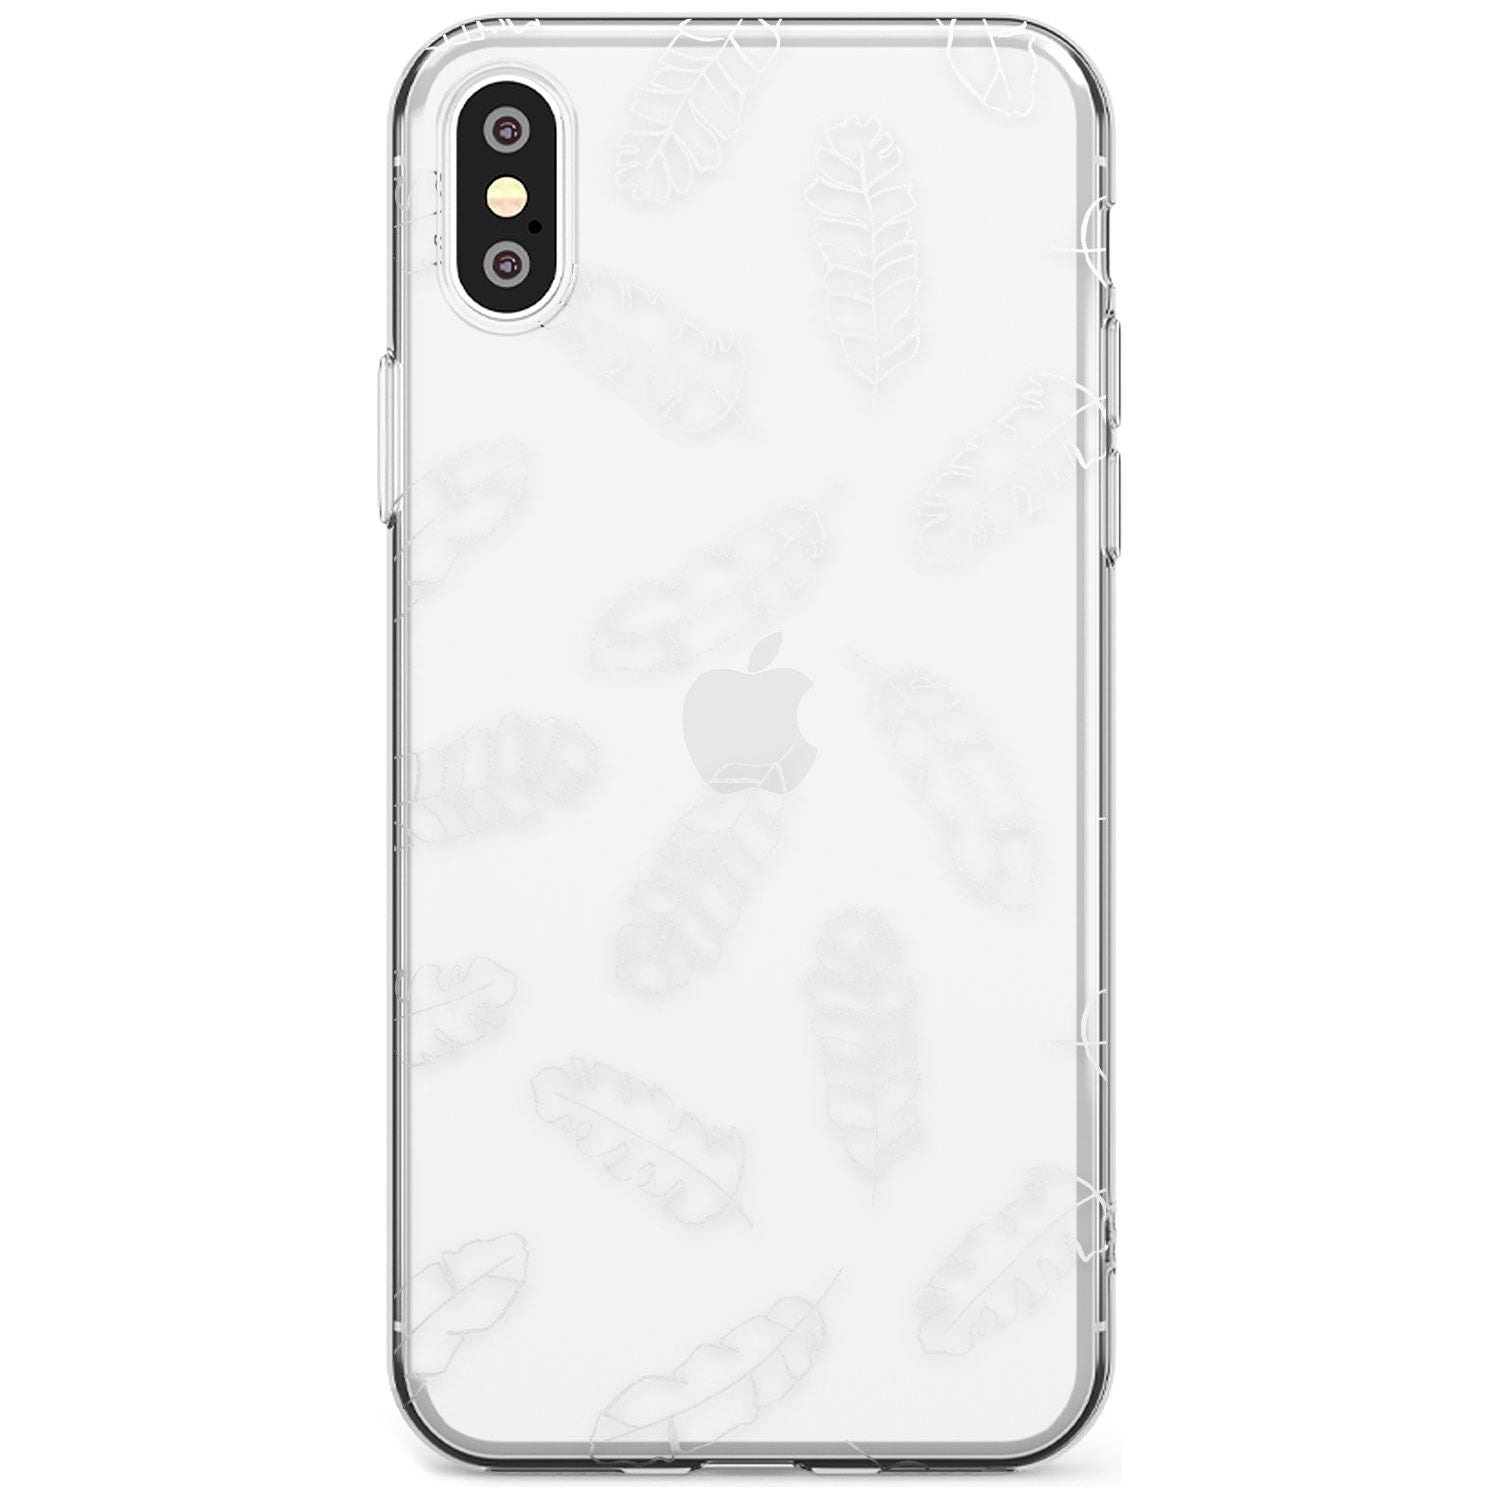 Clear Botanical Designs: Palm Leaves Black Impact Phone Case for iPhone X XS Max XR